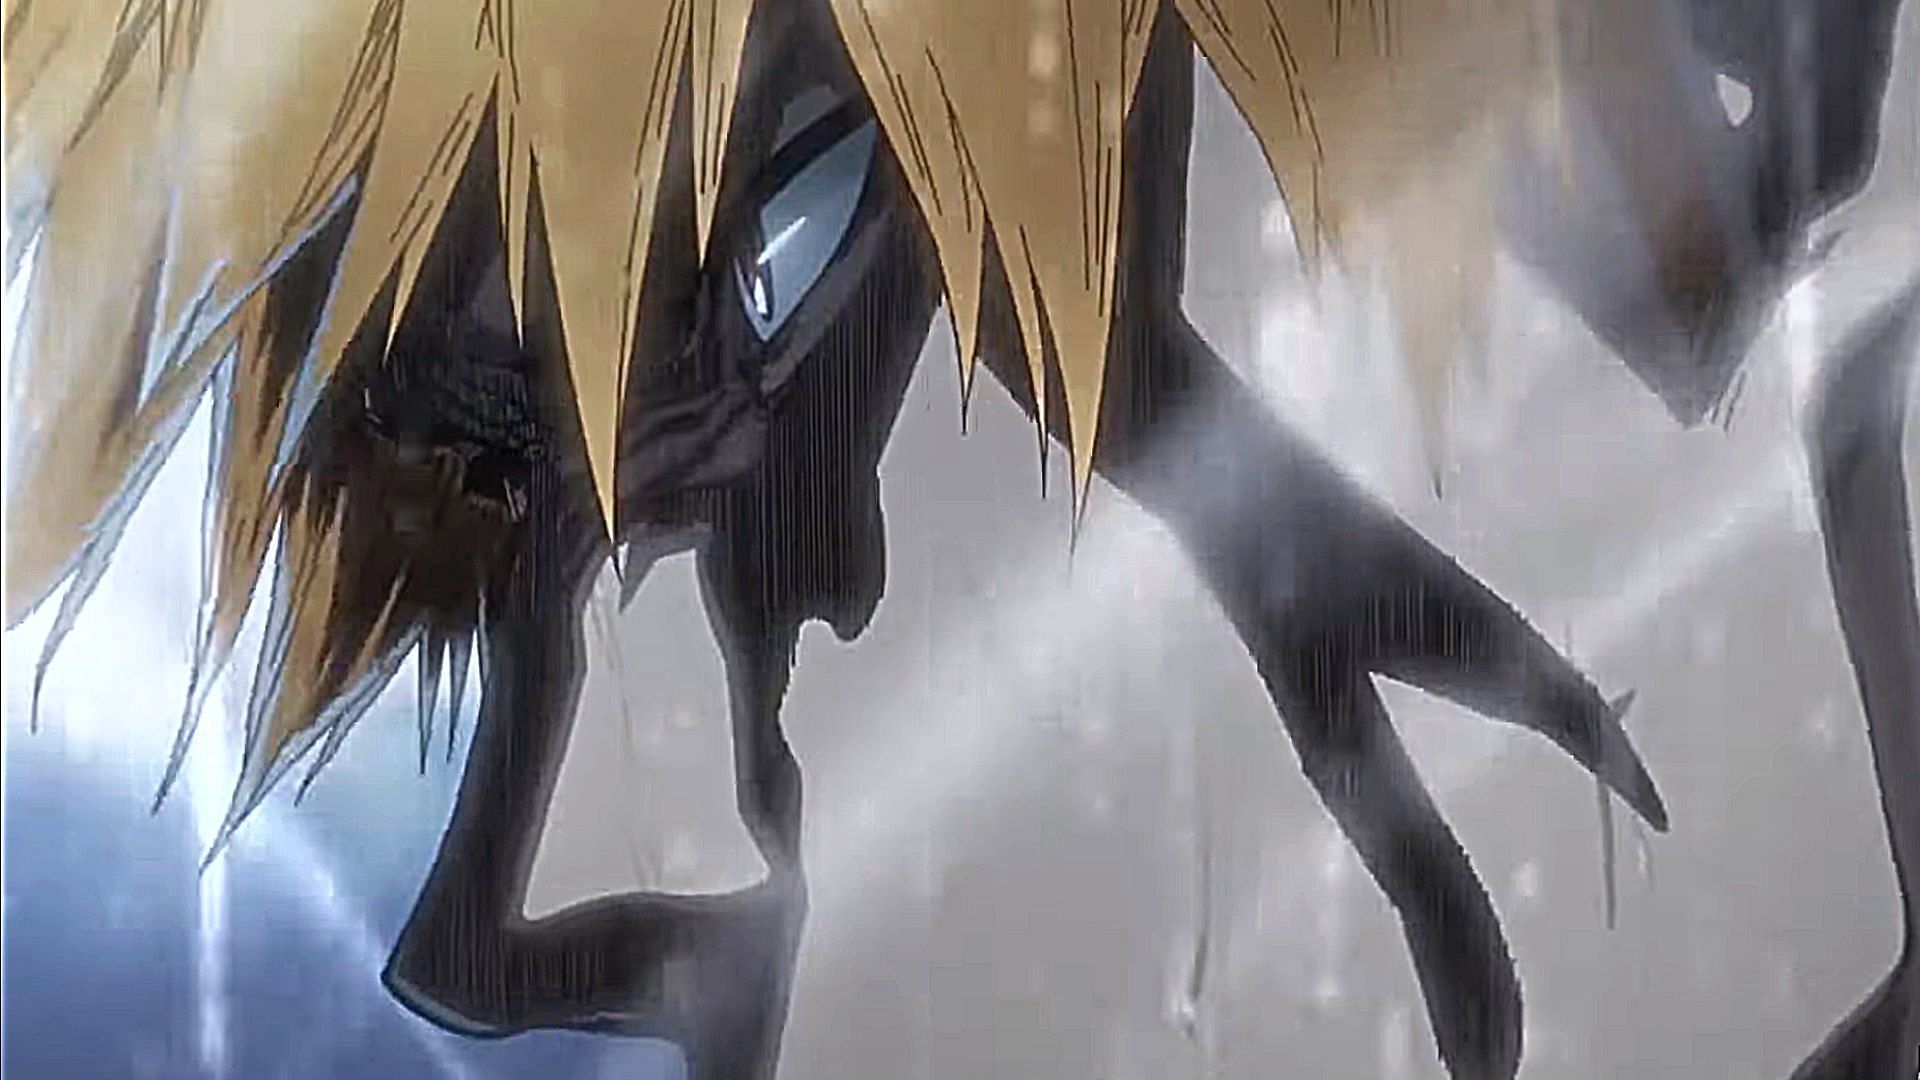 Bleach: Thousand-Year Blood War Episode 7 Release Time and Date